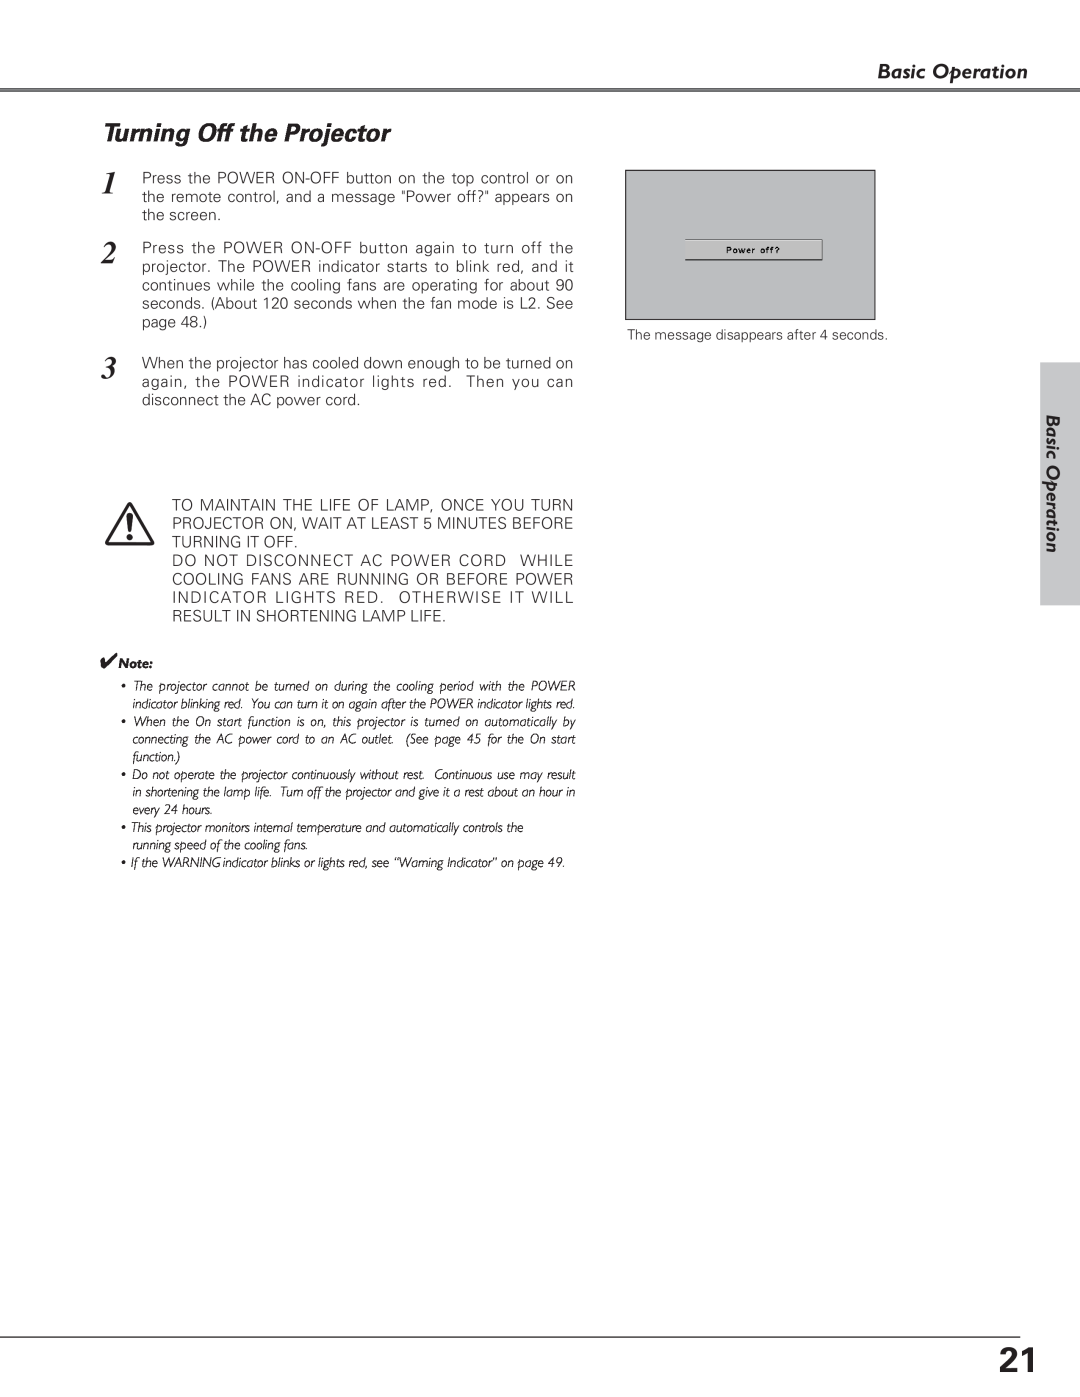 Eiki LC-XB21, LC-XB26 owner manual Turning Off the Projector, Basic Operation 